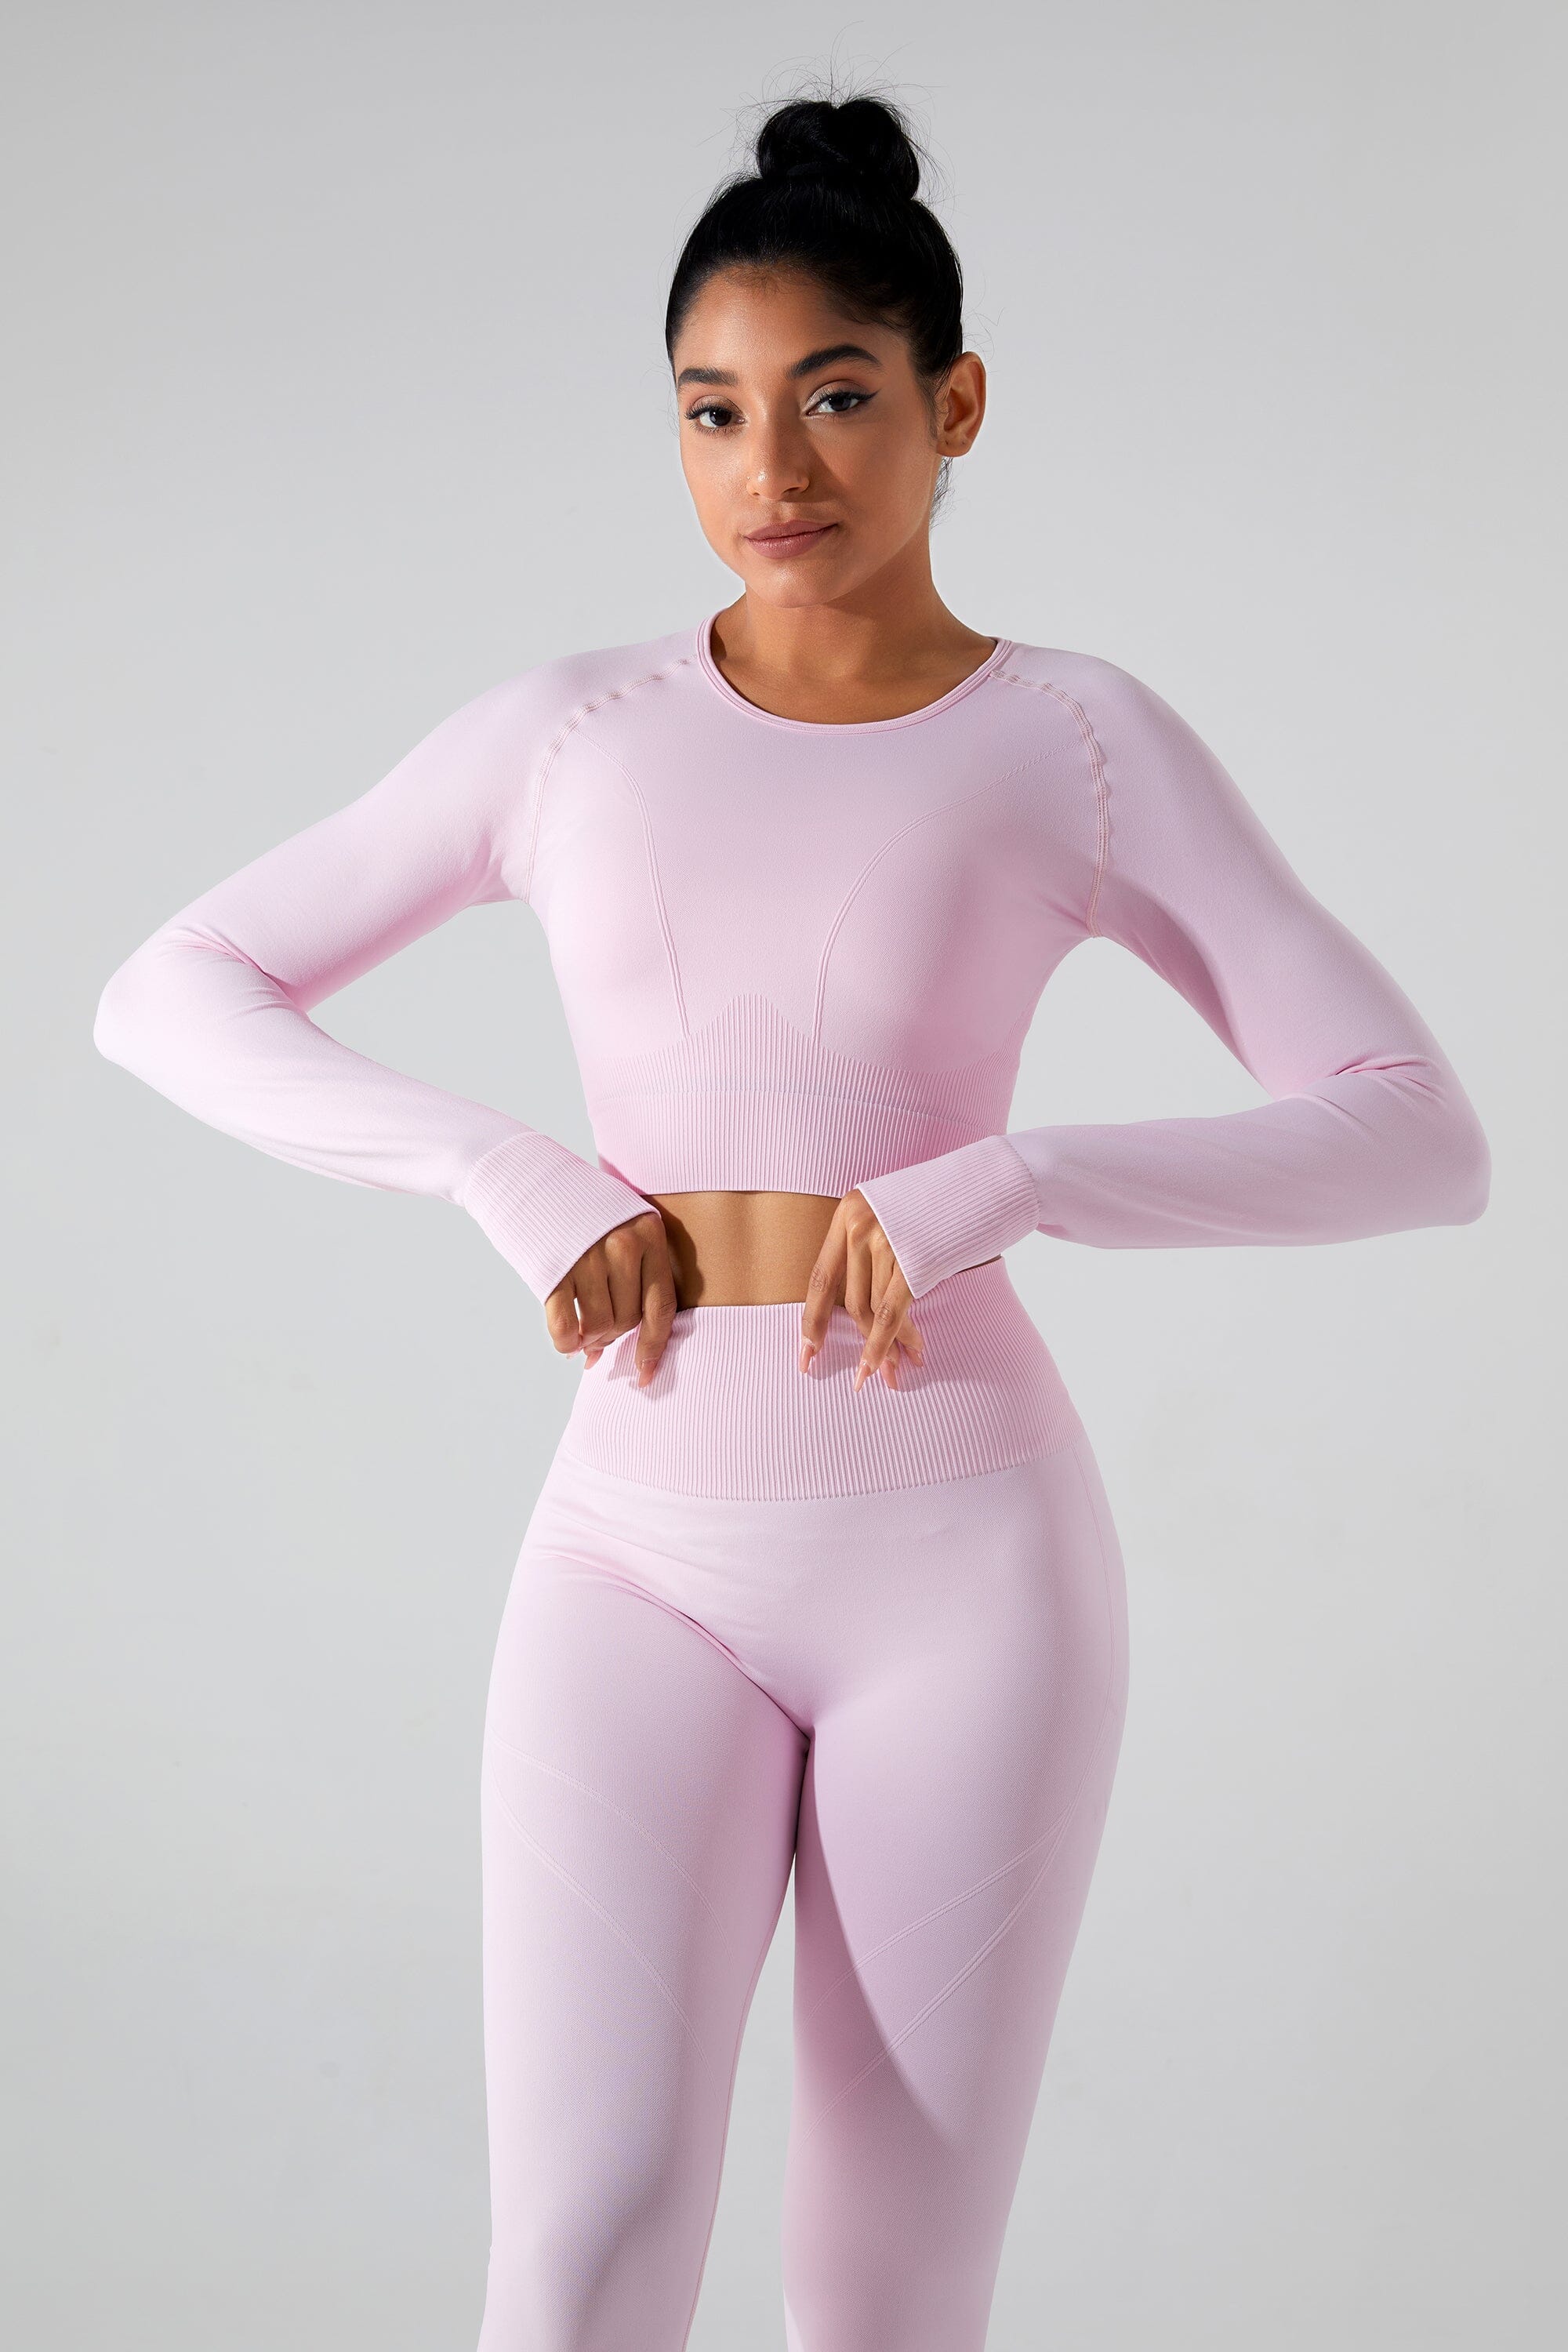 Eclipse Seamless Top Top Starlethics Pink S 